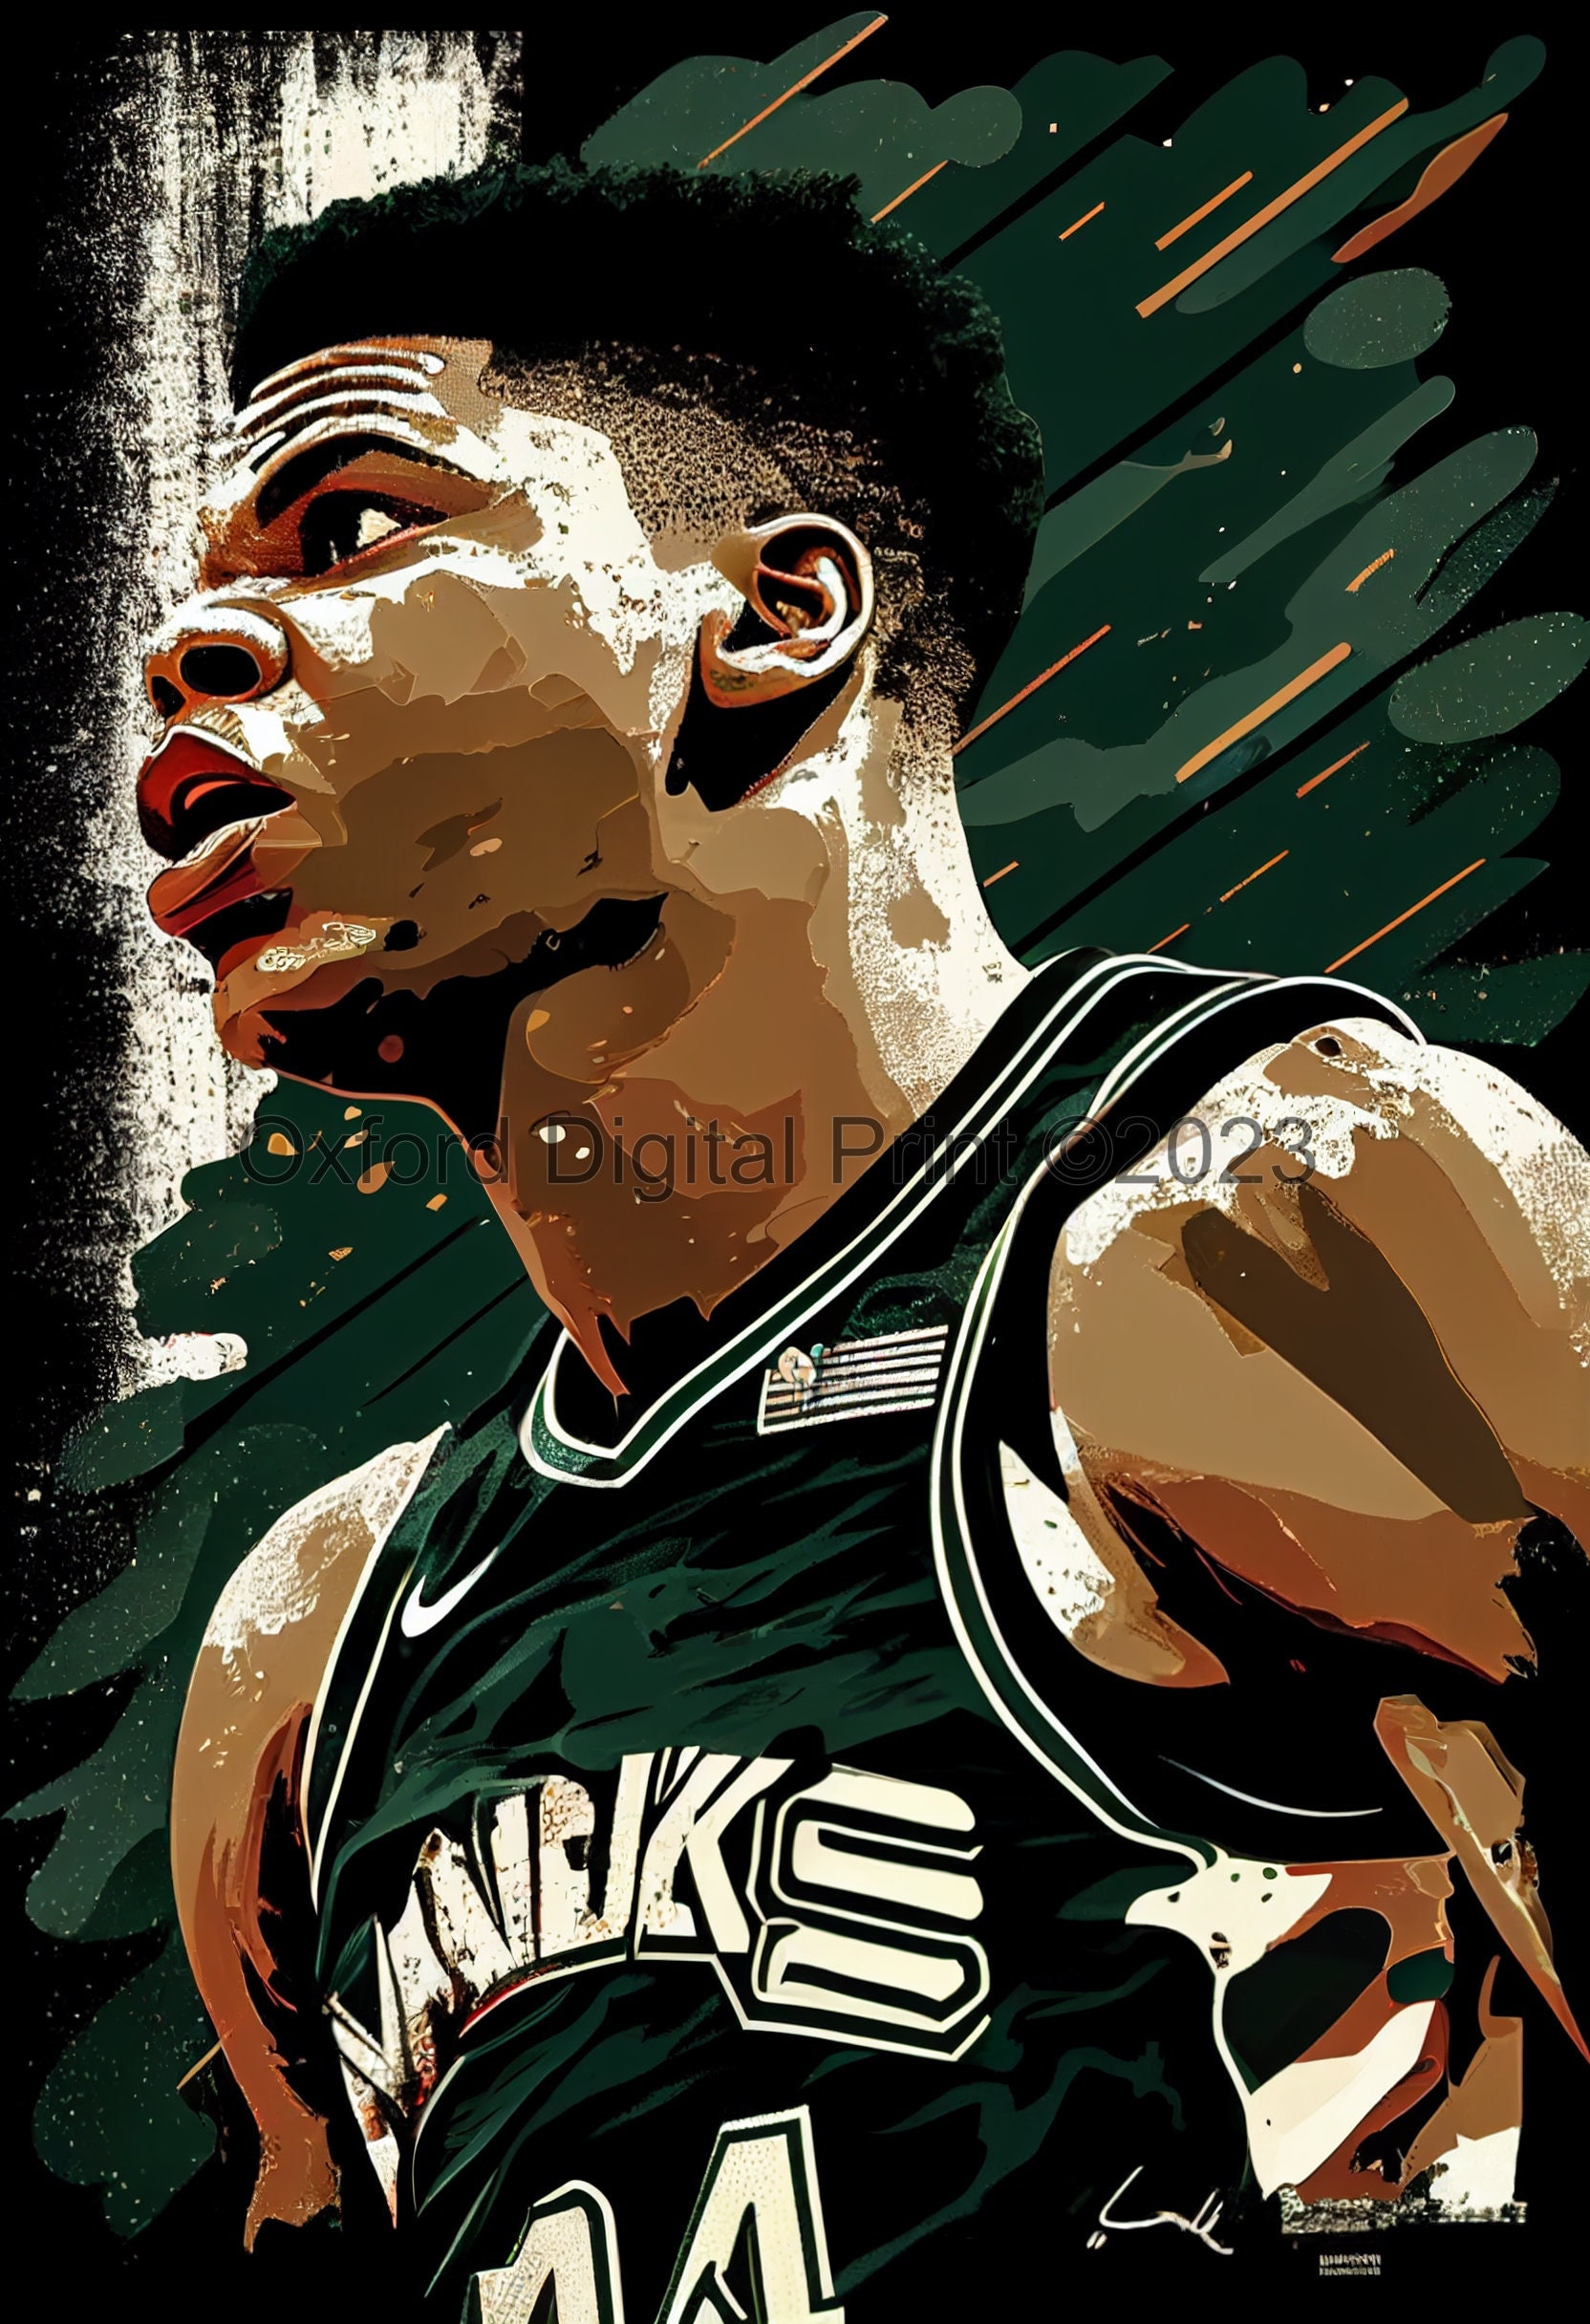  Giannis Limited Poster Artwork - Professional Wall Art